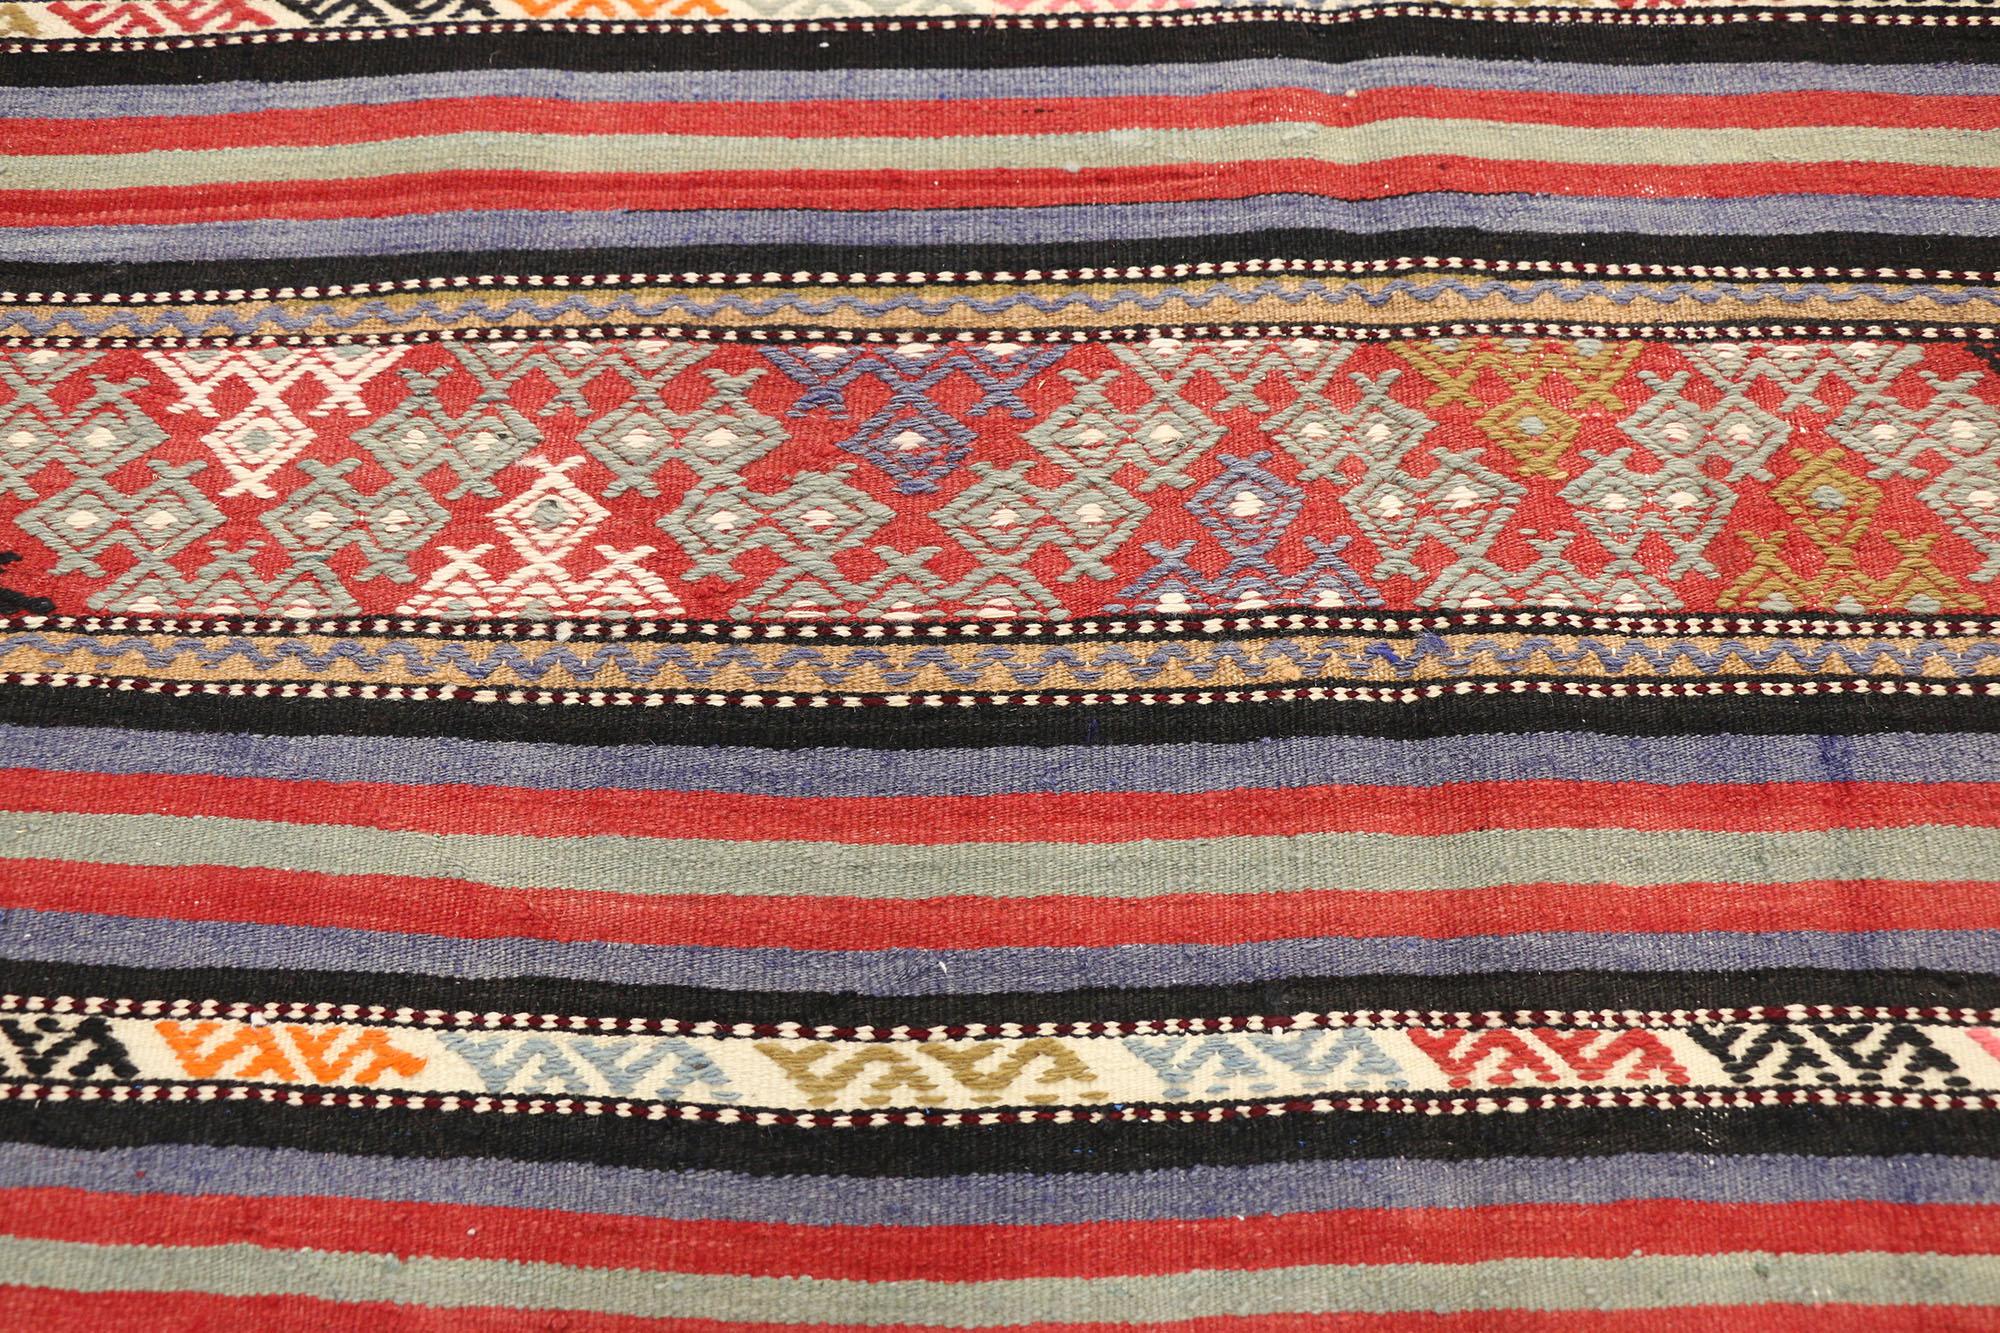 Vintage Turkish Striped Kilim Rug with Modern Boho Chic Tribal Style In Good Condition For Sale In Dallas, TX